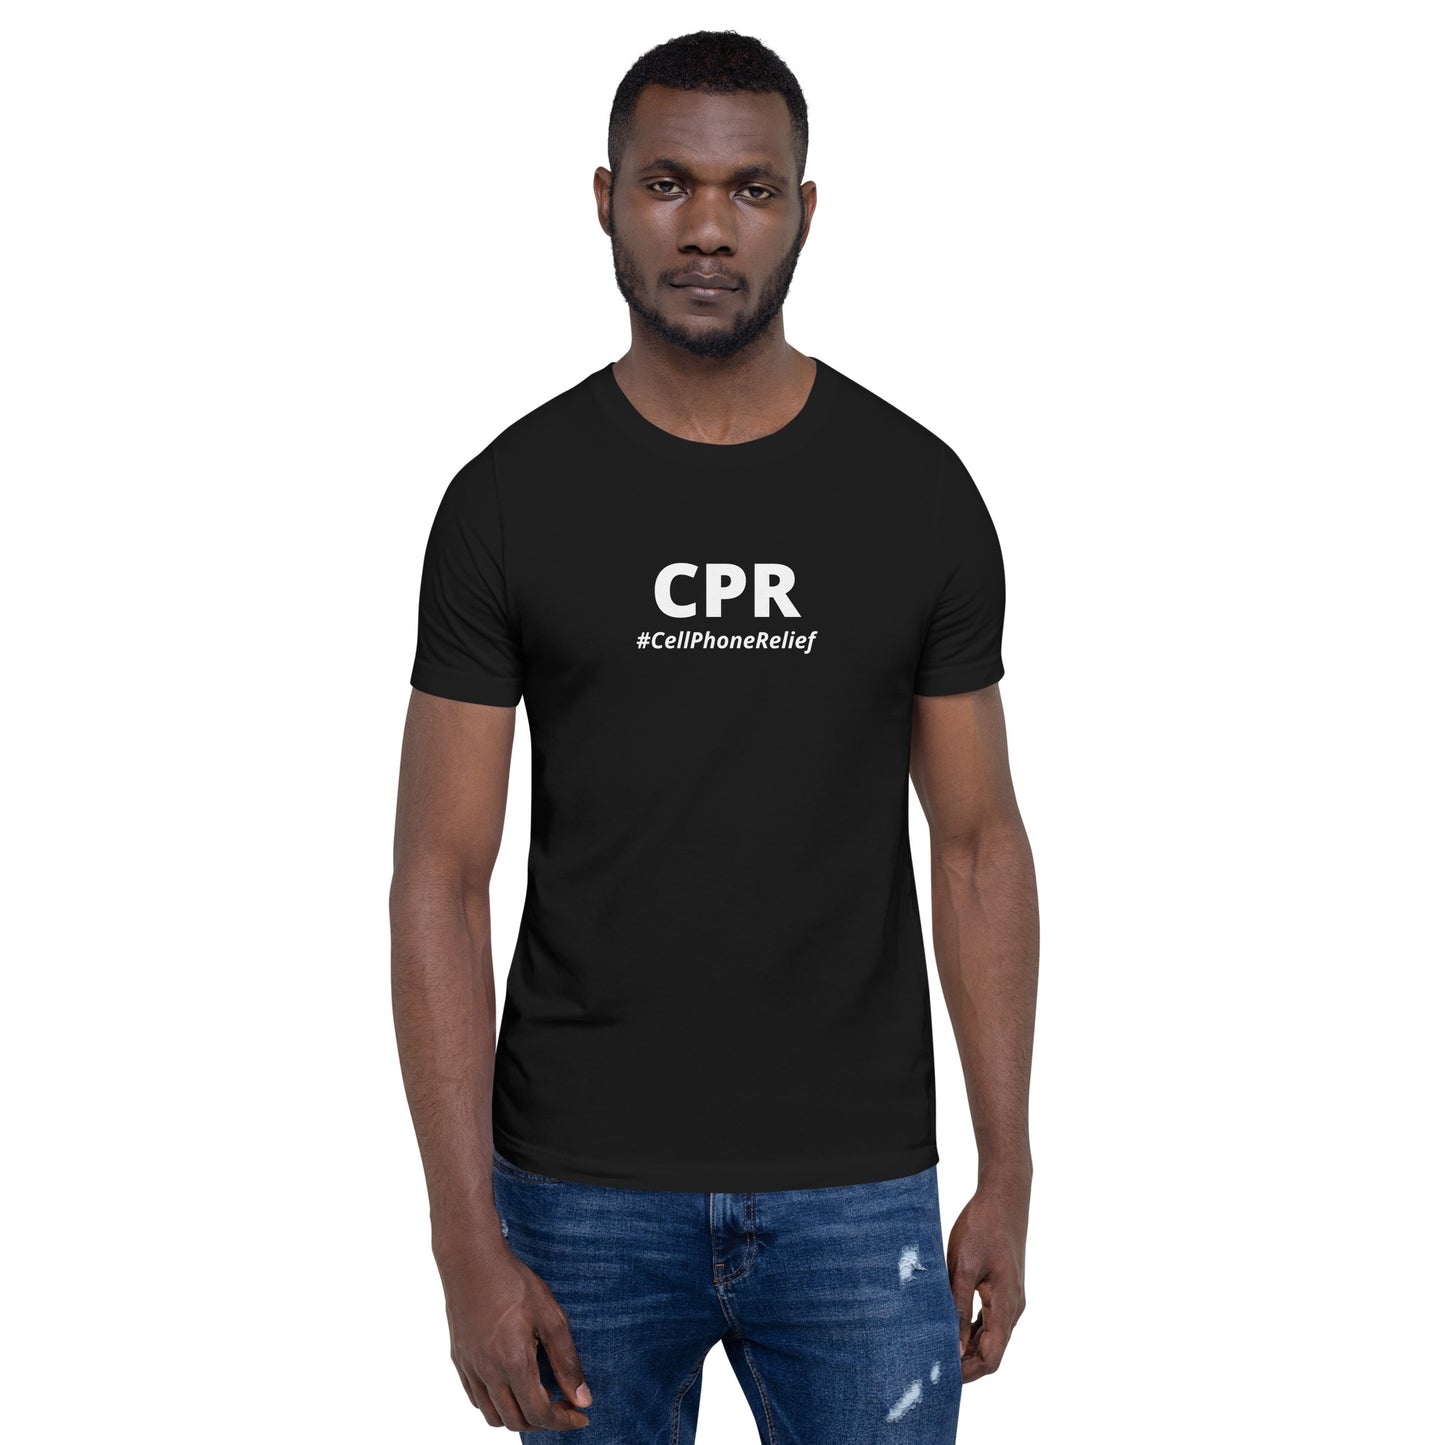 CPR (Cell Phone Relief) Unisex t-shirt - Black